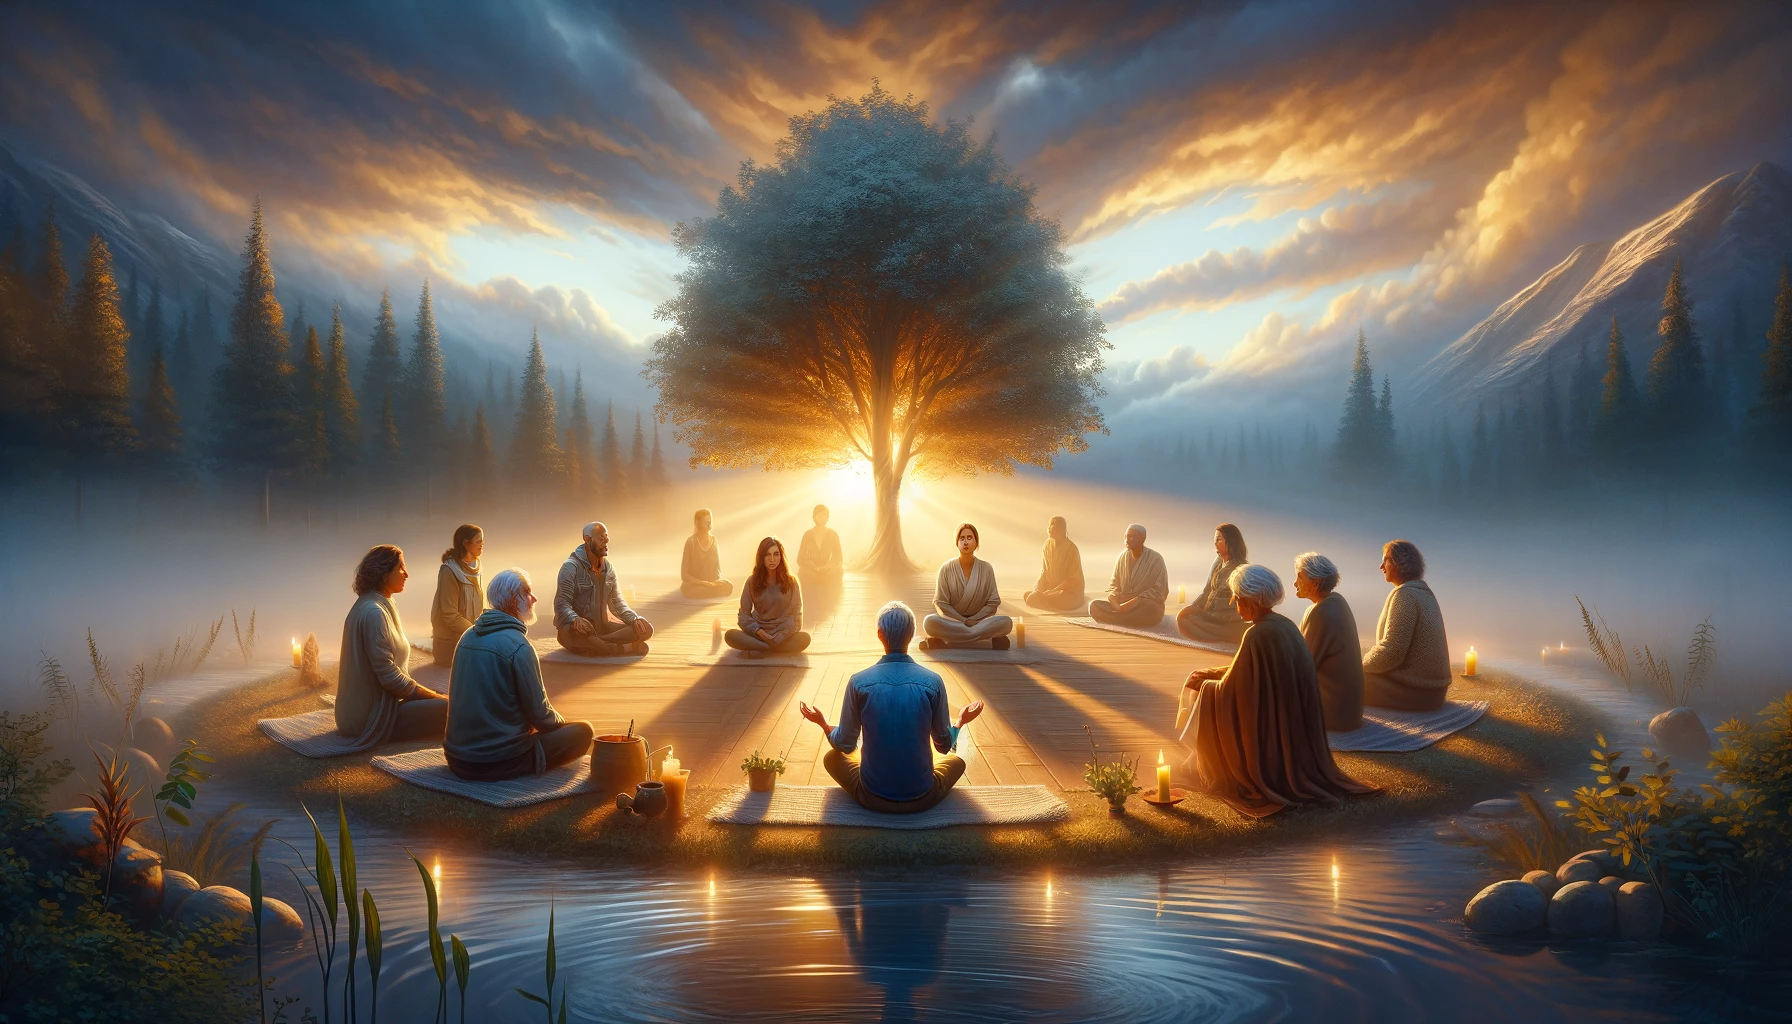 An image that embodies the theme of forgiveness and self-acceptance in the journey of recovery. The scene should depict a peaceful and empathetic envi